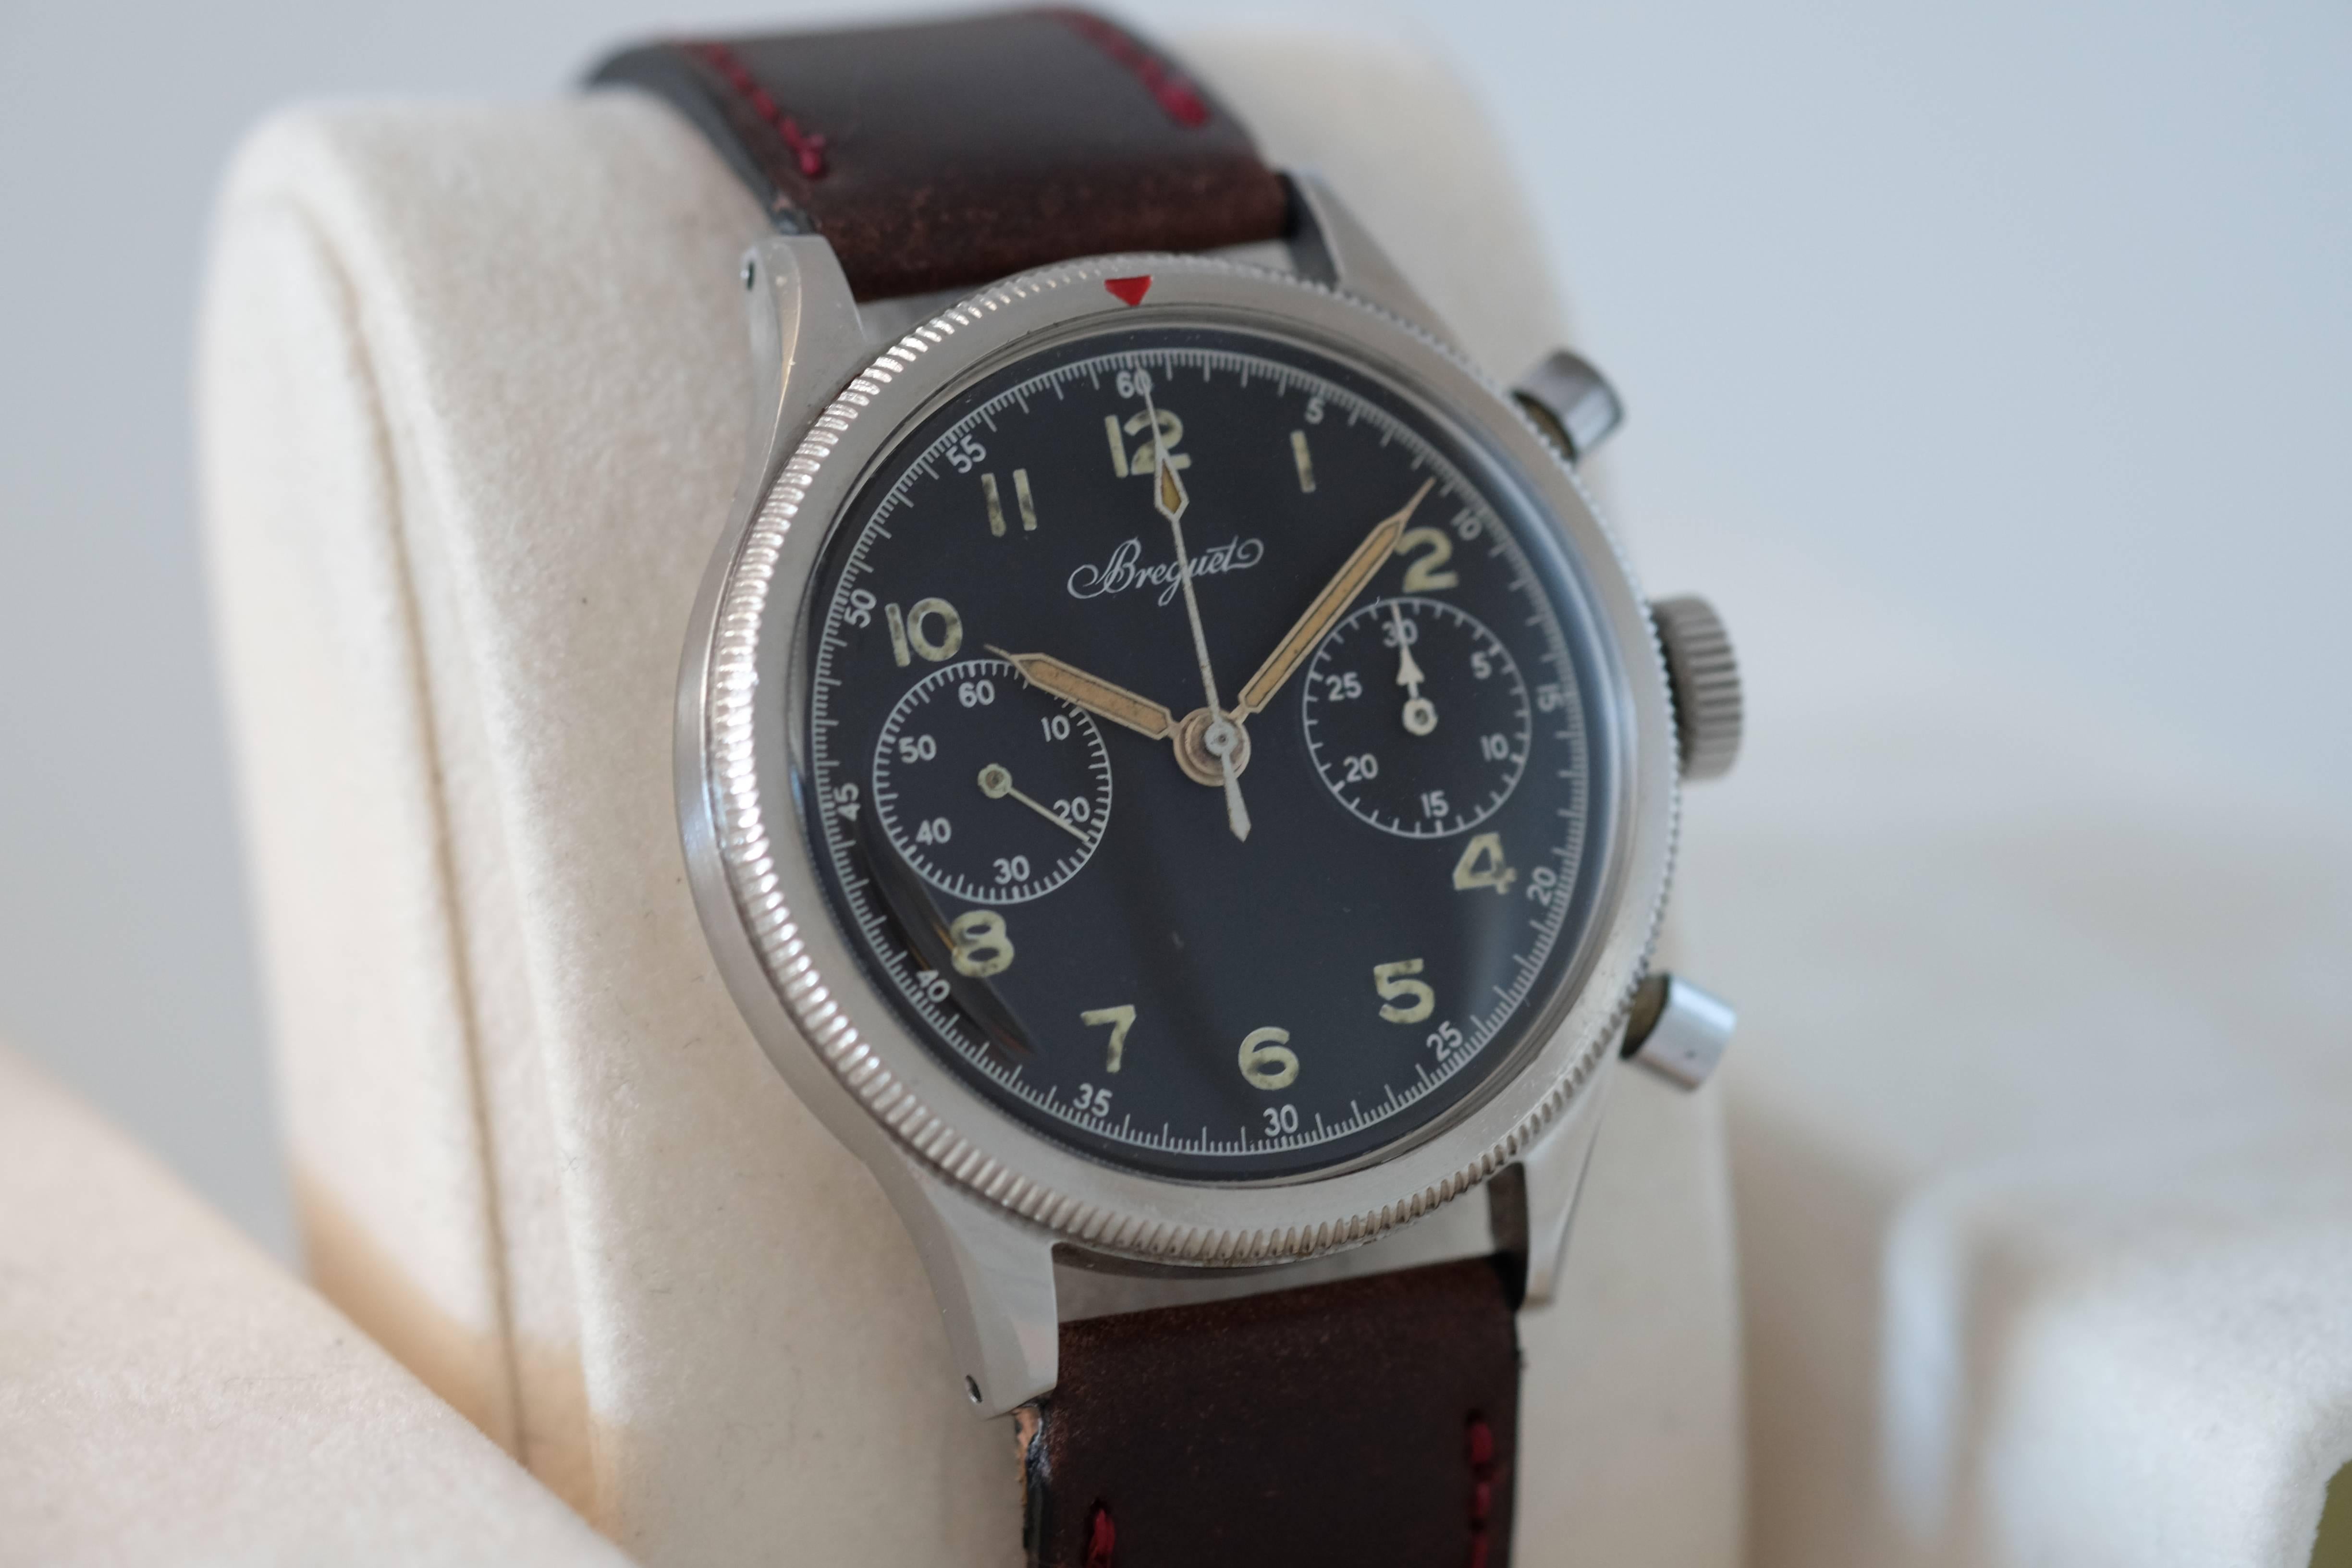 Breguet. A Rare and Early Stainless Steel Chronograph Wristwatch Issued by the French Military

Model: Type 20

Circa: 1954

Valjoux Cal. 222 mechanical movement, 17 jewels, black matte dial, luminous Arabic numerals, outer minute divisions